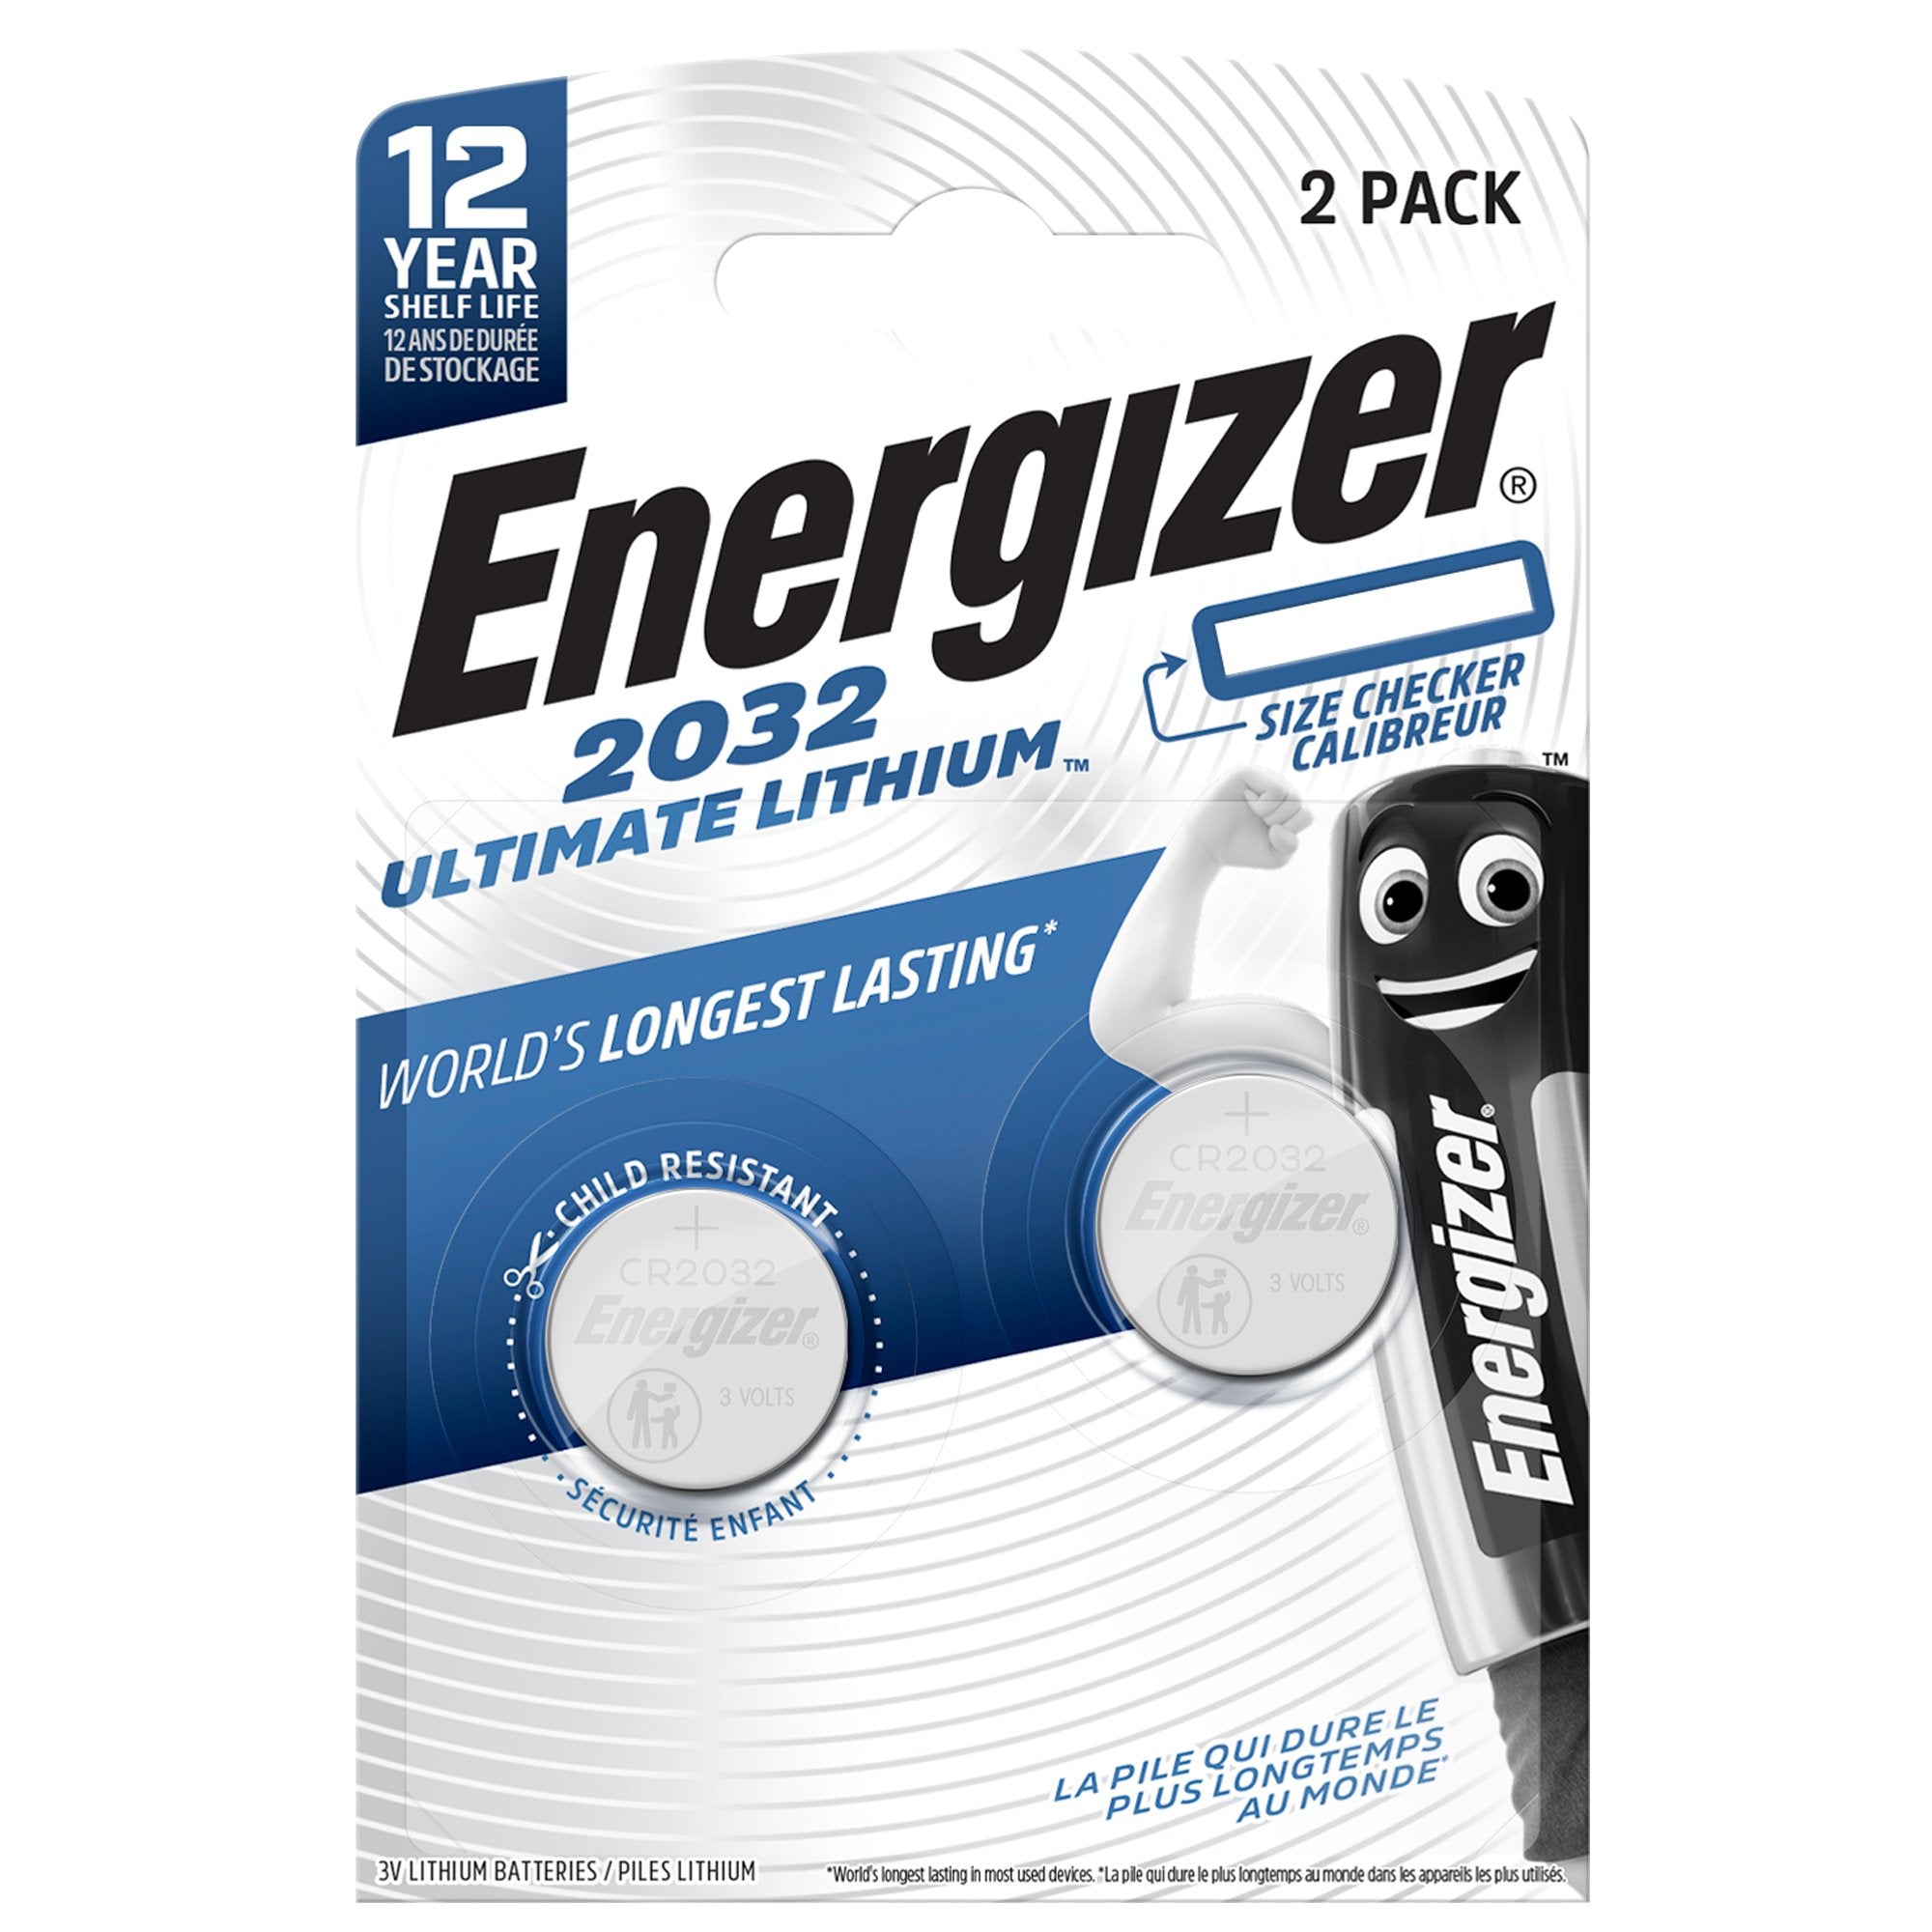 energizer-blister-2-pile-cr2032-ultimate-lithium-specialistiche